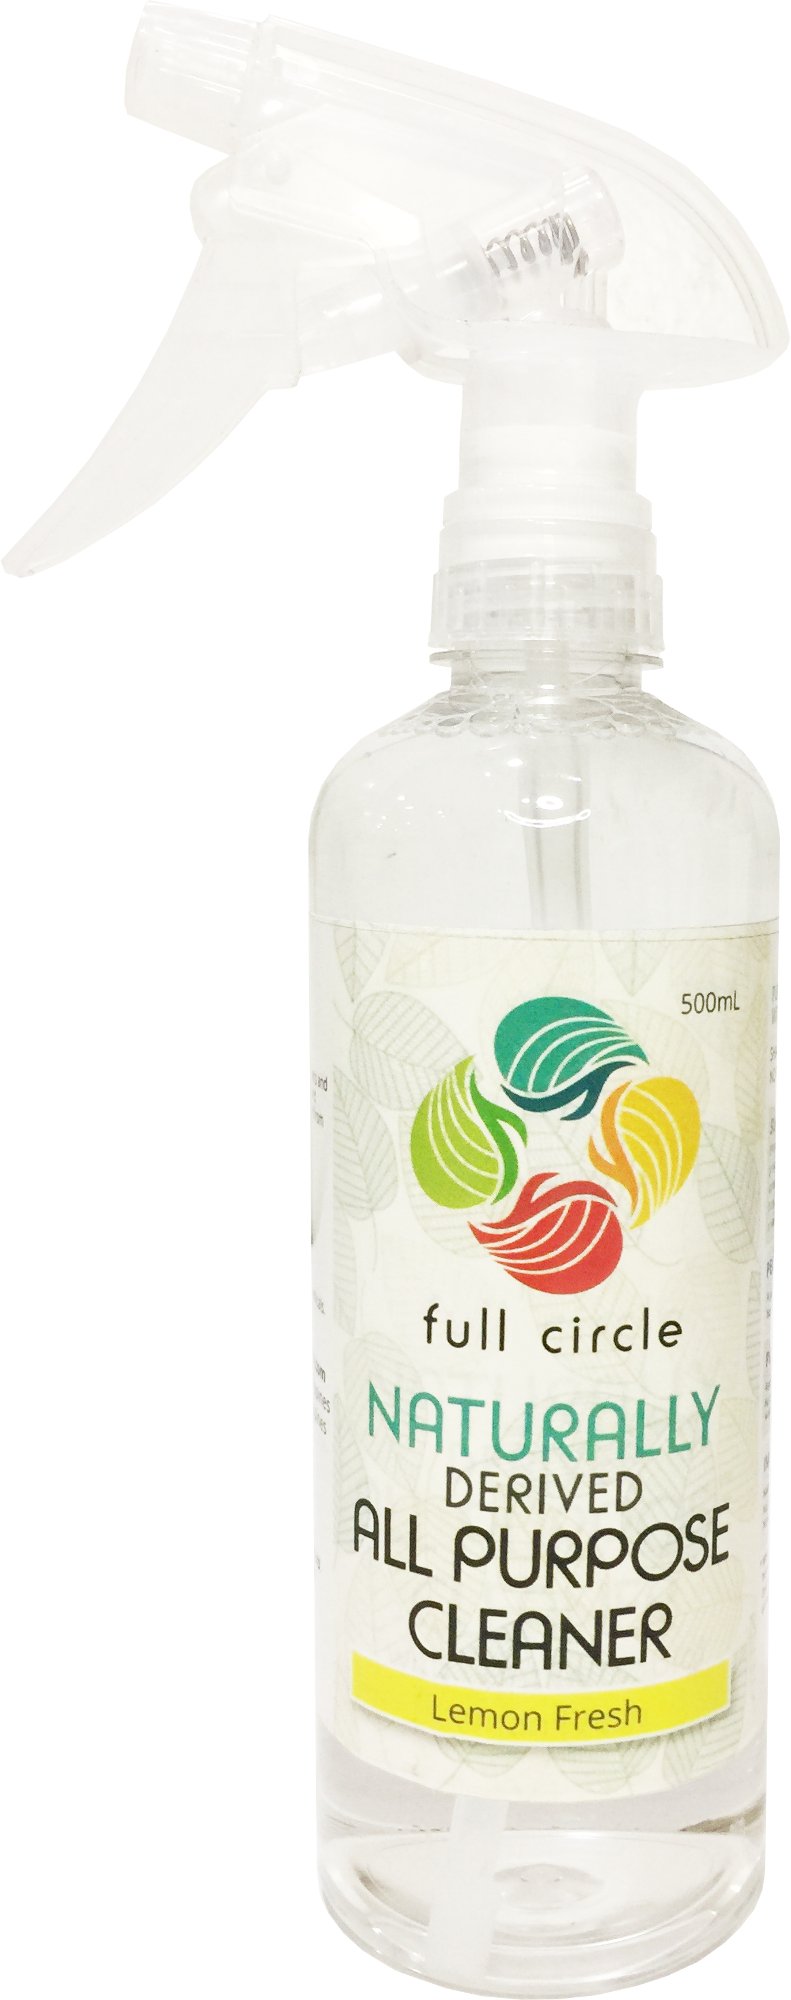 Full Circle - Naturally-Derived All Purpose Cleaner 500ml (4530179538978)